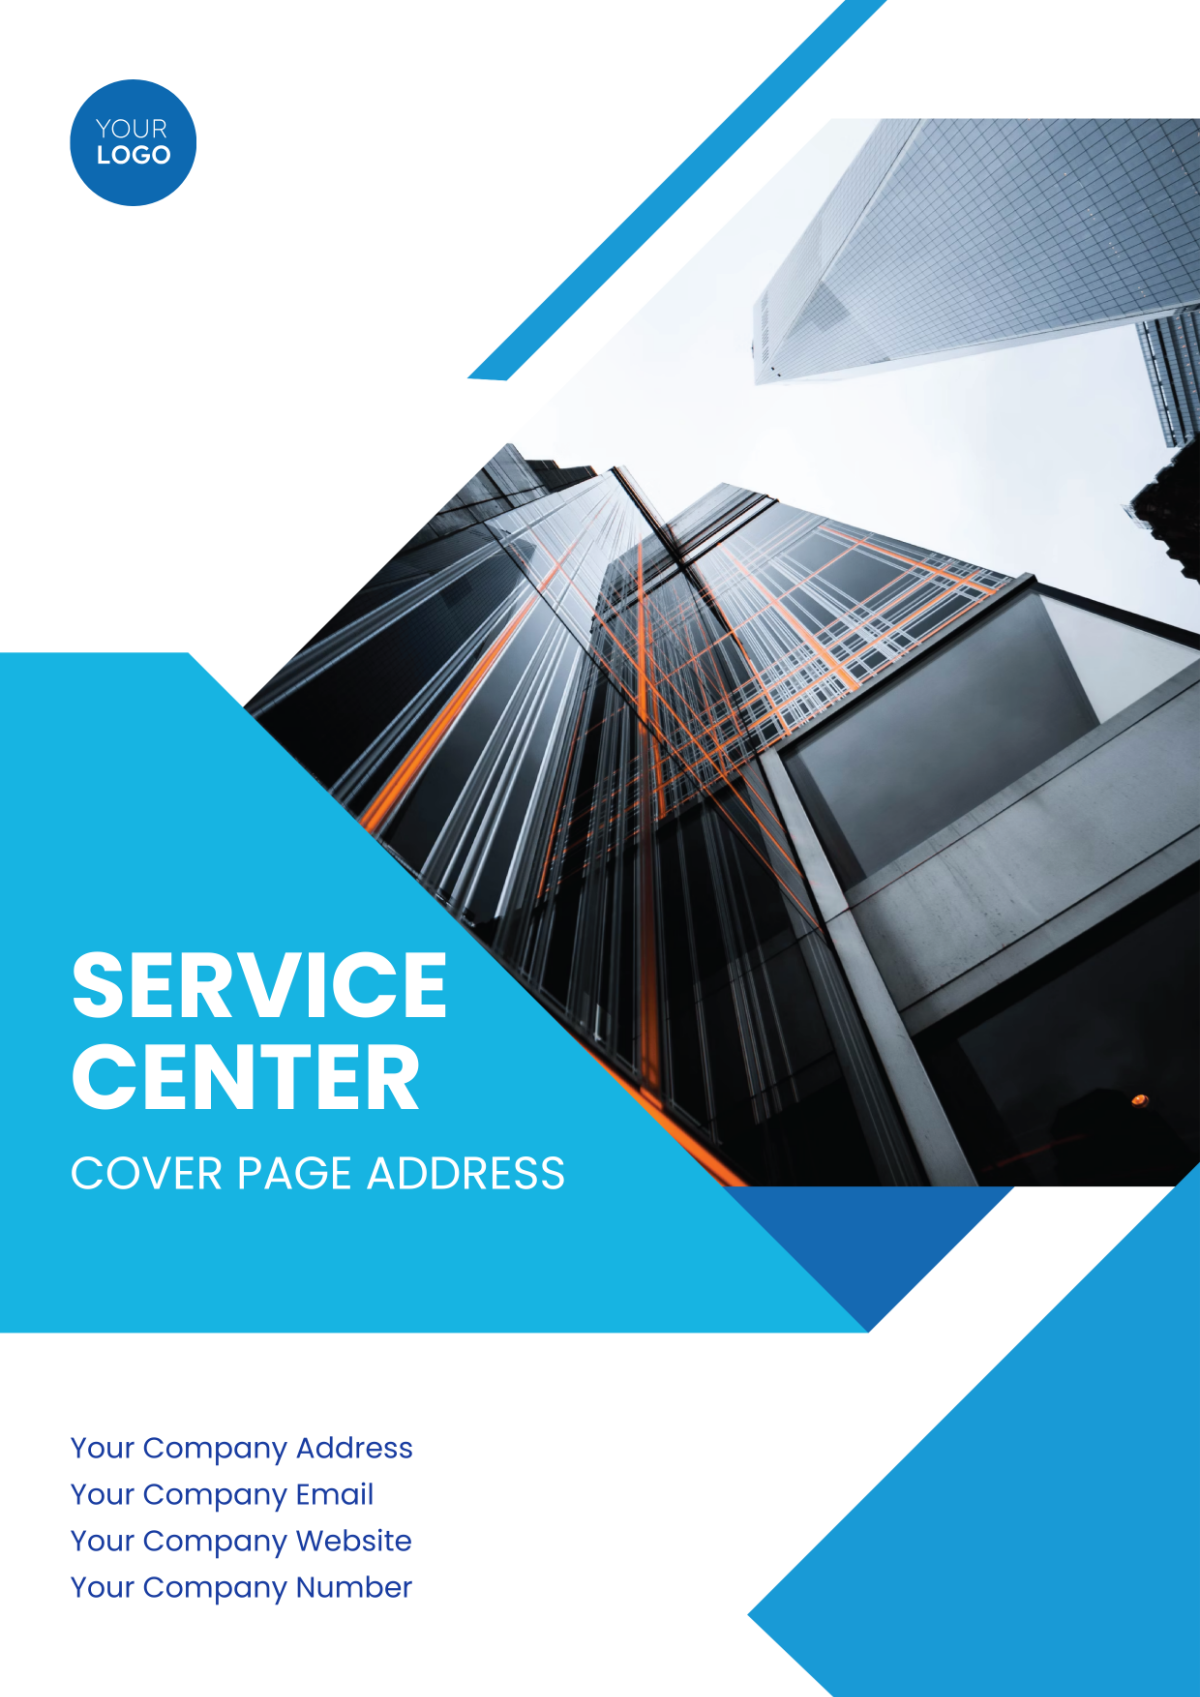 Service Center Cover Page Address